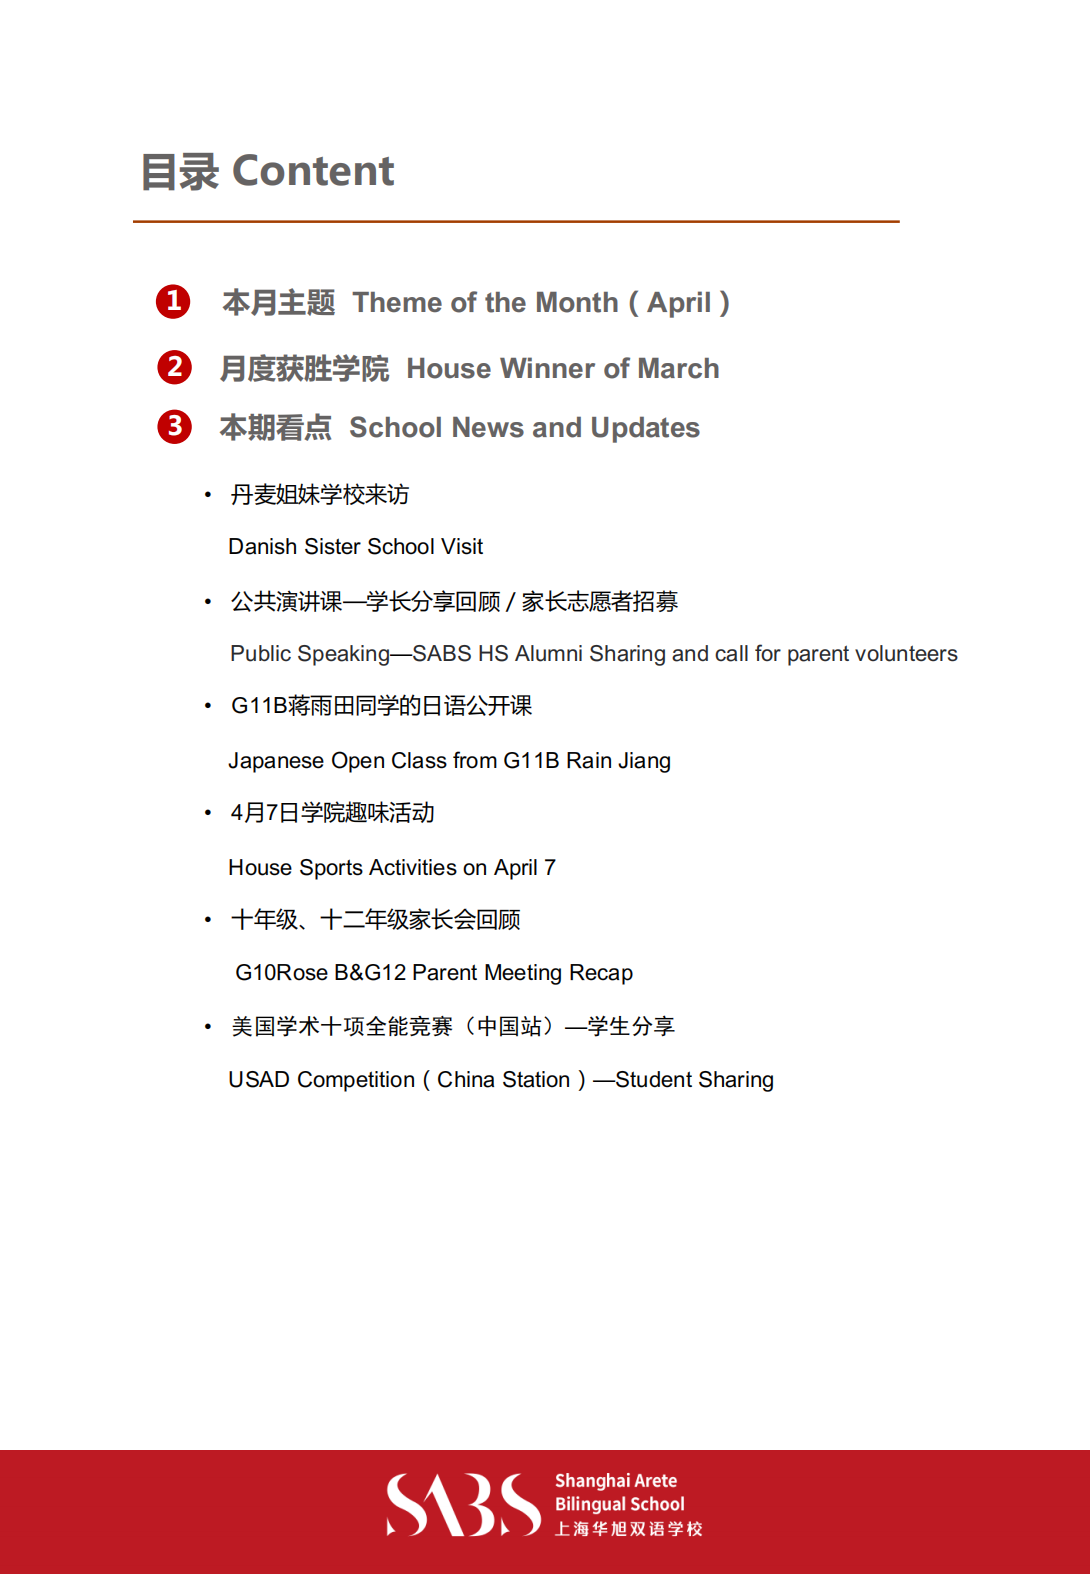 HS 4th Issue Newsletter pptx（Chinese）_01.png